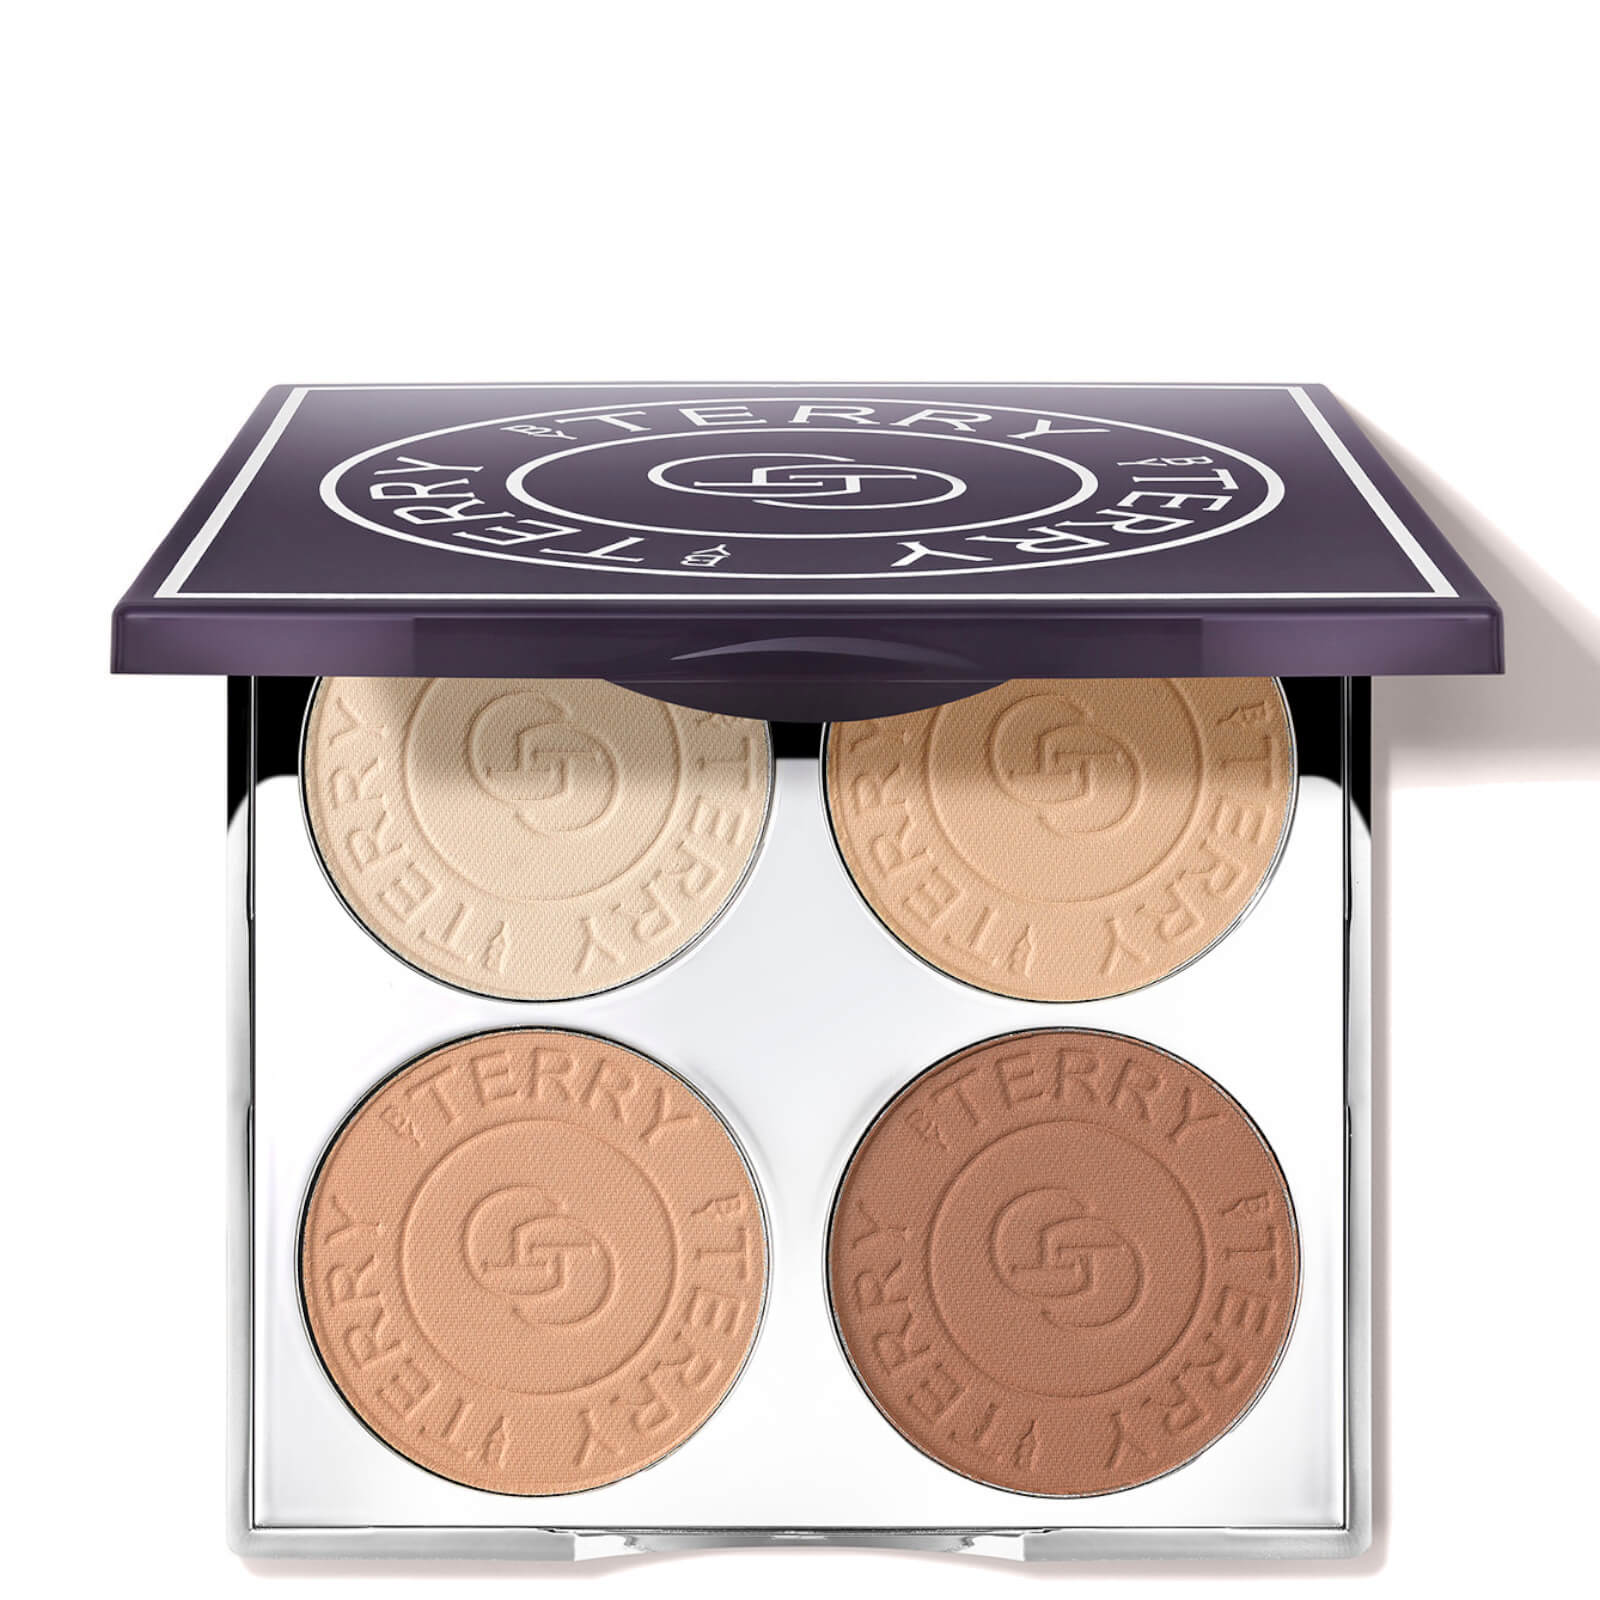 Image of By Terry Hyaluronic Hydra-Powder Palette - N°2 Medium to Warm